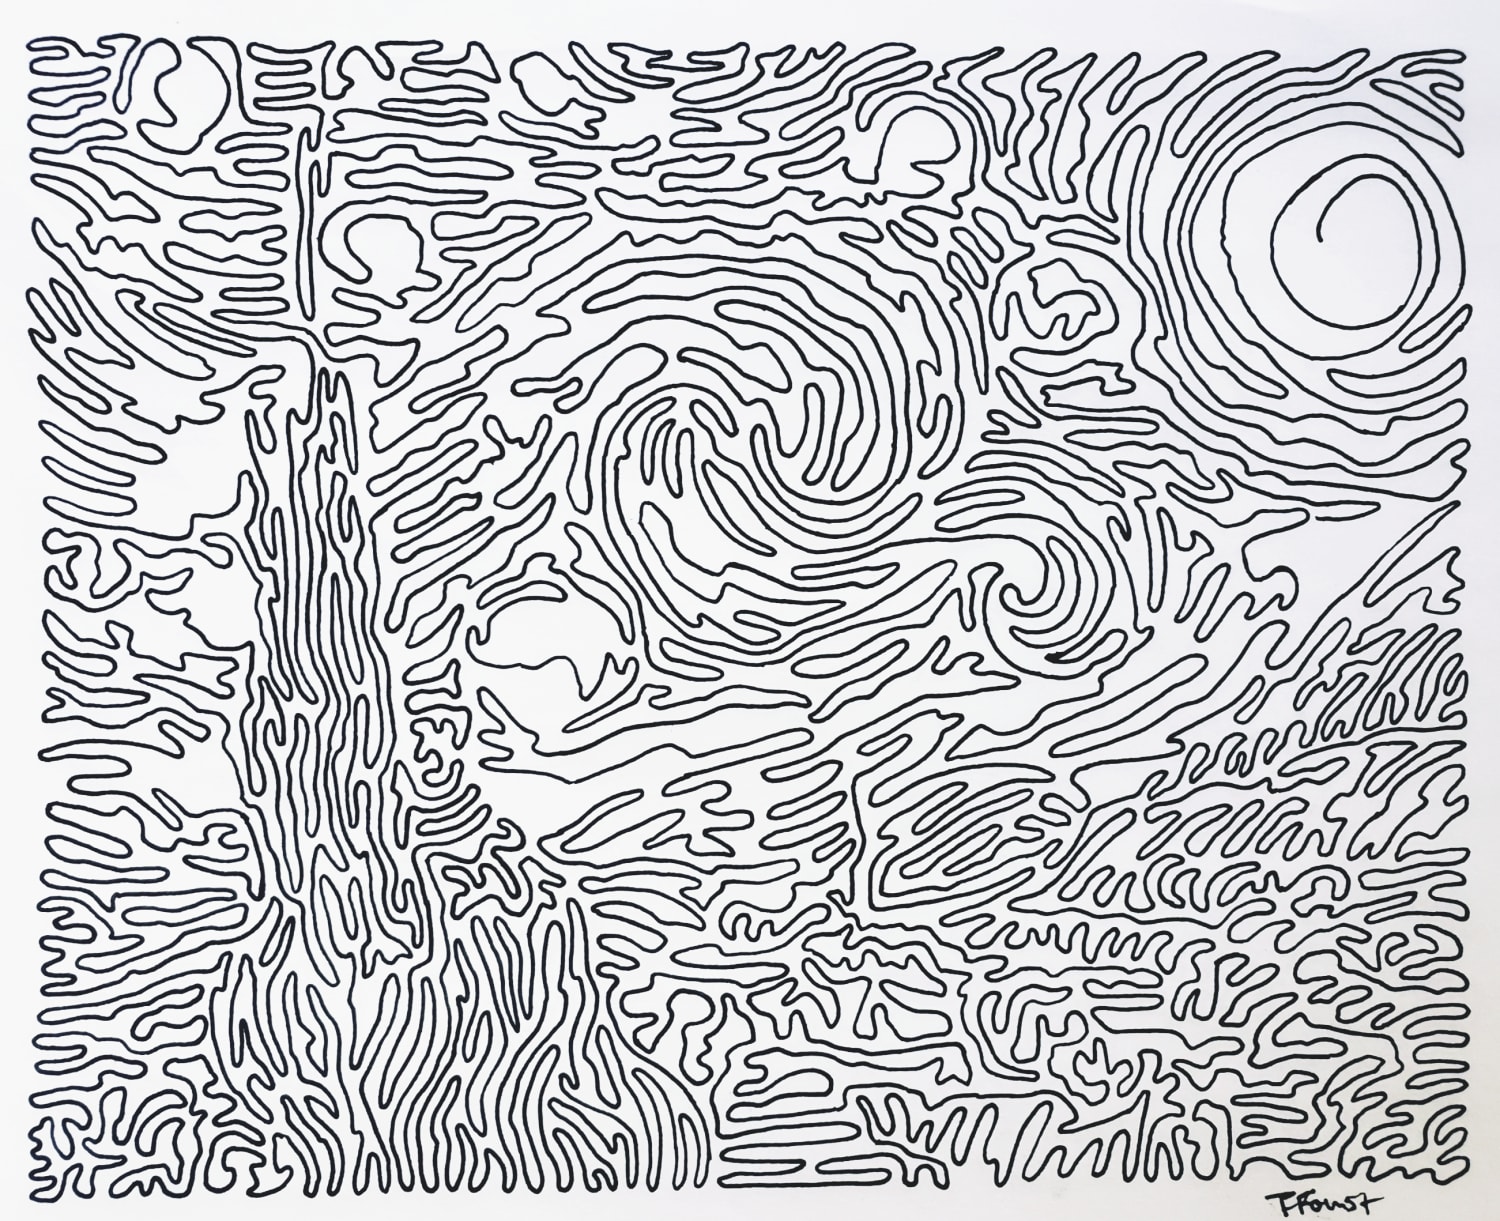 I recreated Van Gogh's painting with one line and wanted to share